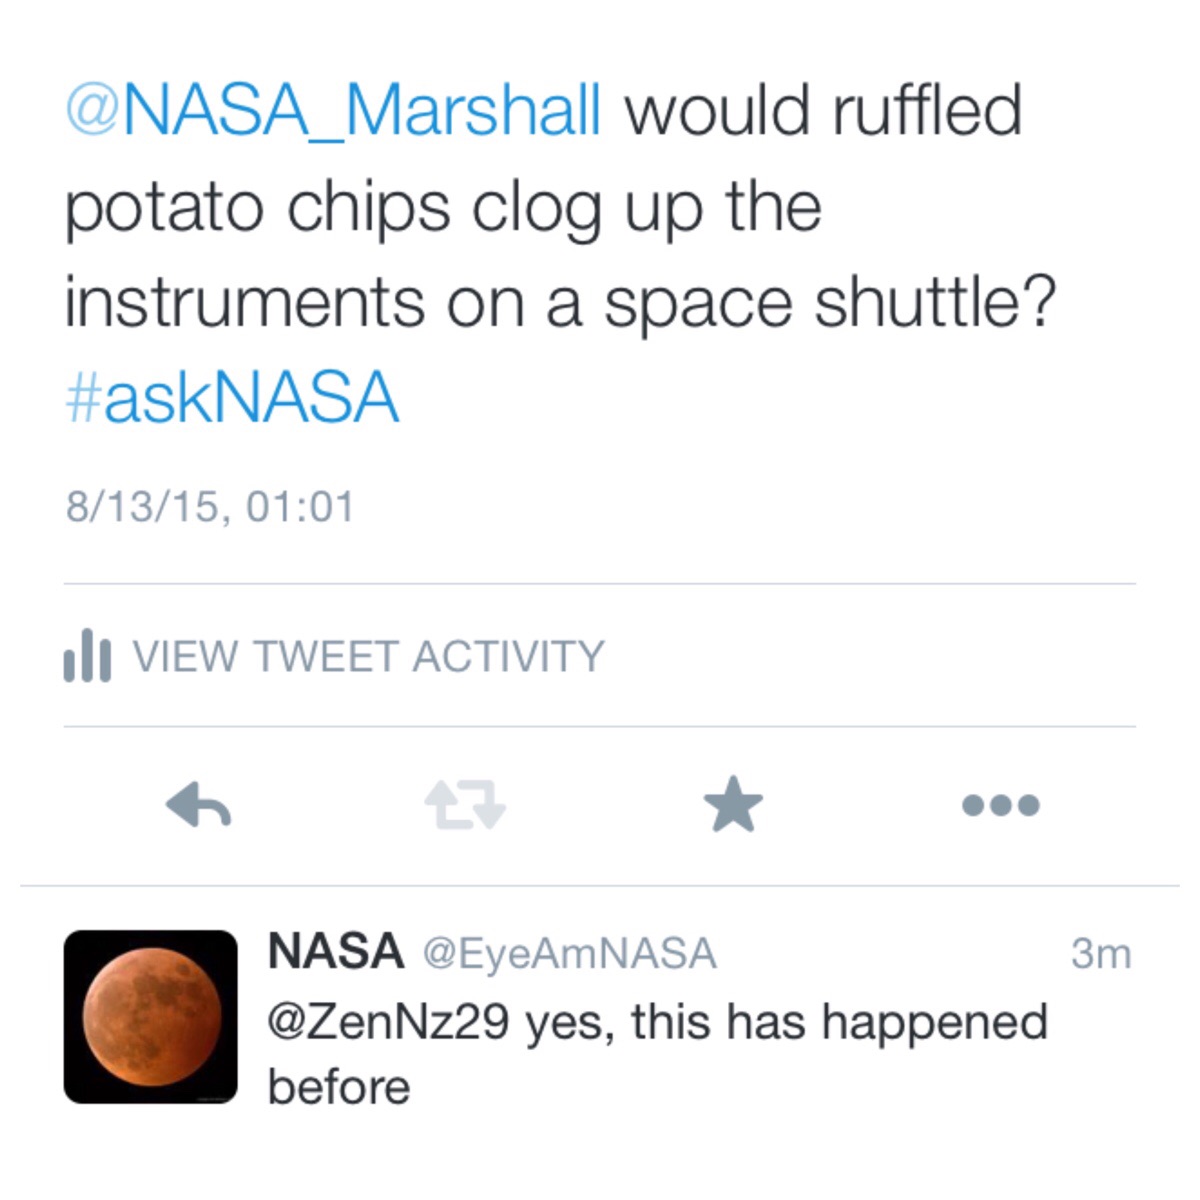 Funny tweet that someone asked NASA about potato chips clogging up the space shuttle instruments and they write back to him that it is and has happened in the past